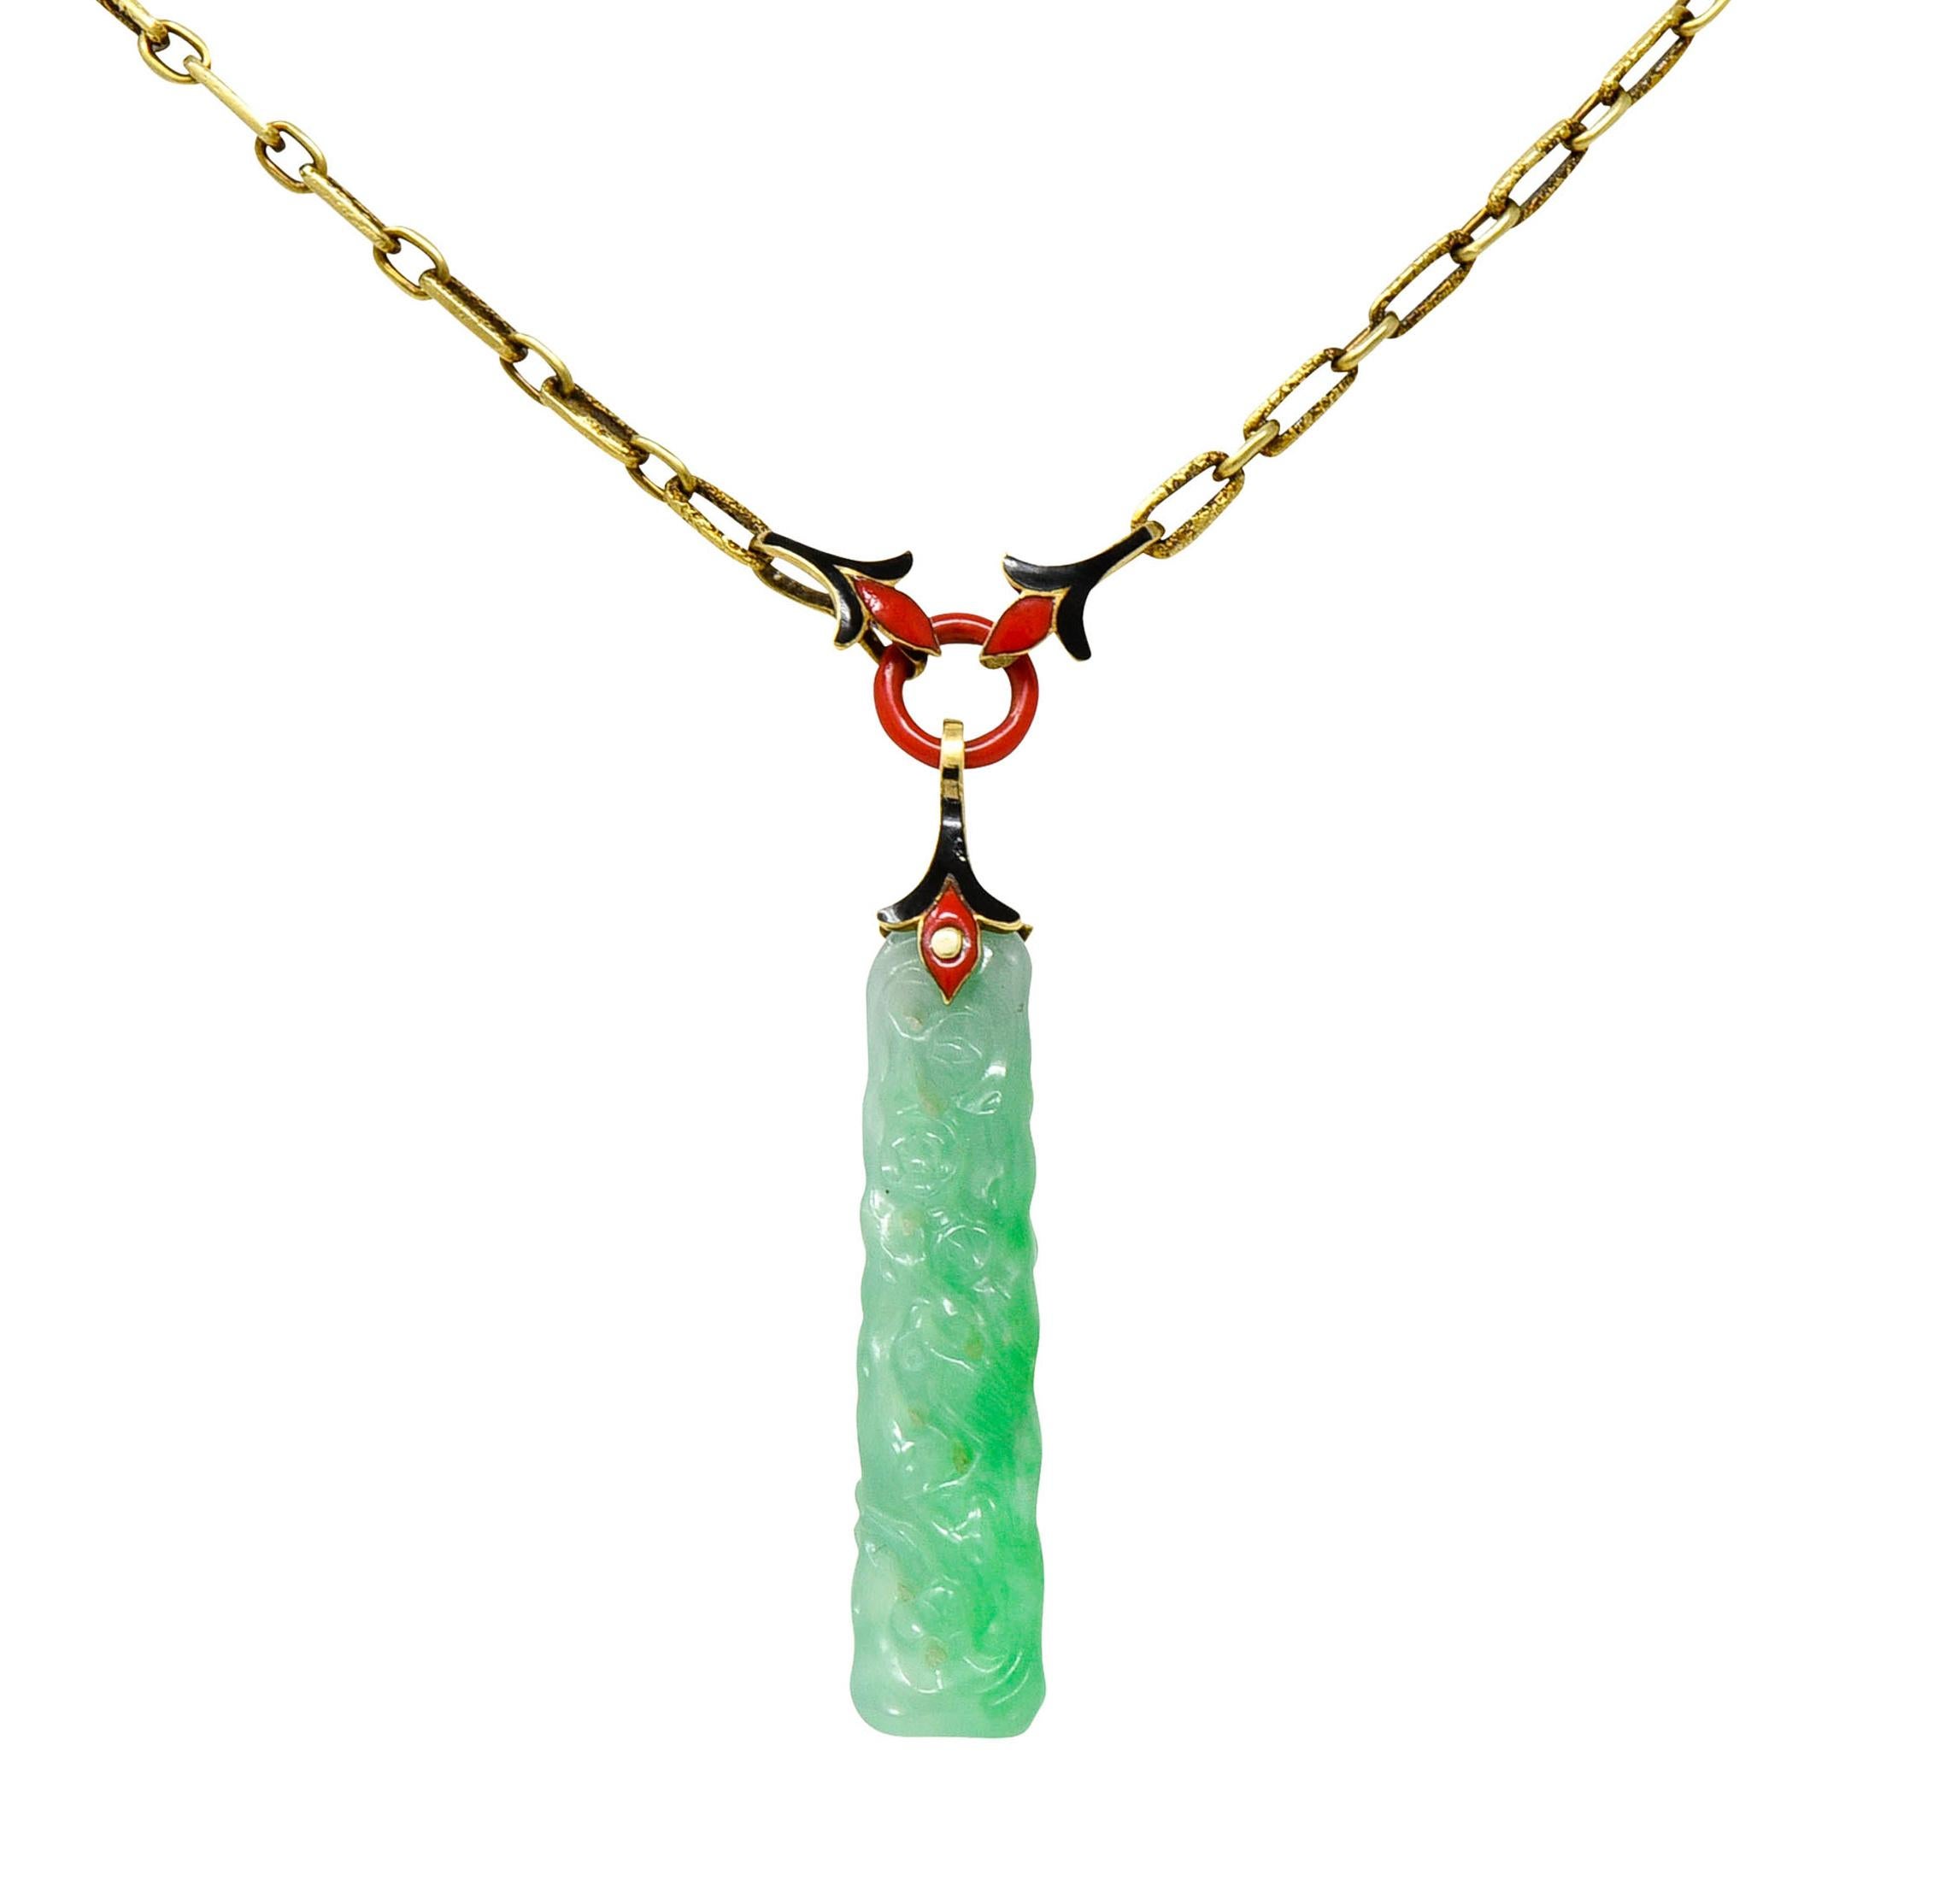 Necklace is comprised of elongated links alternating in texture

With a stylized floral central station glossed with black and red enamel - exhibiting some loss

Suspending a long tabular piece of jade - translucent light green to saturated